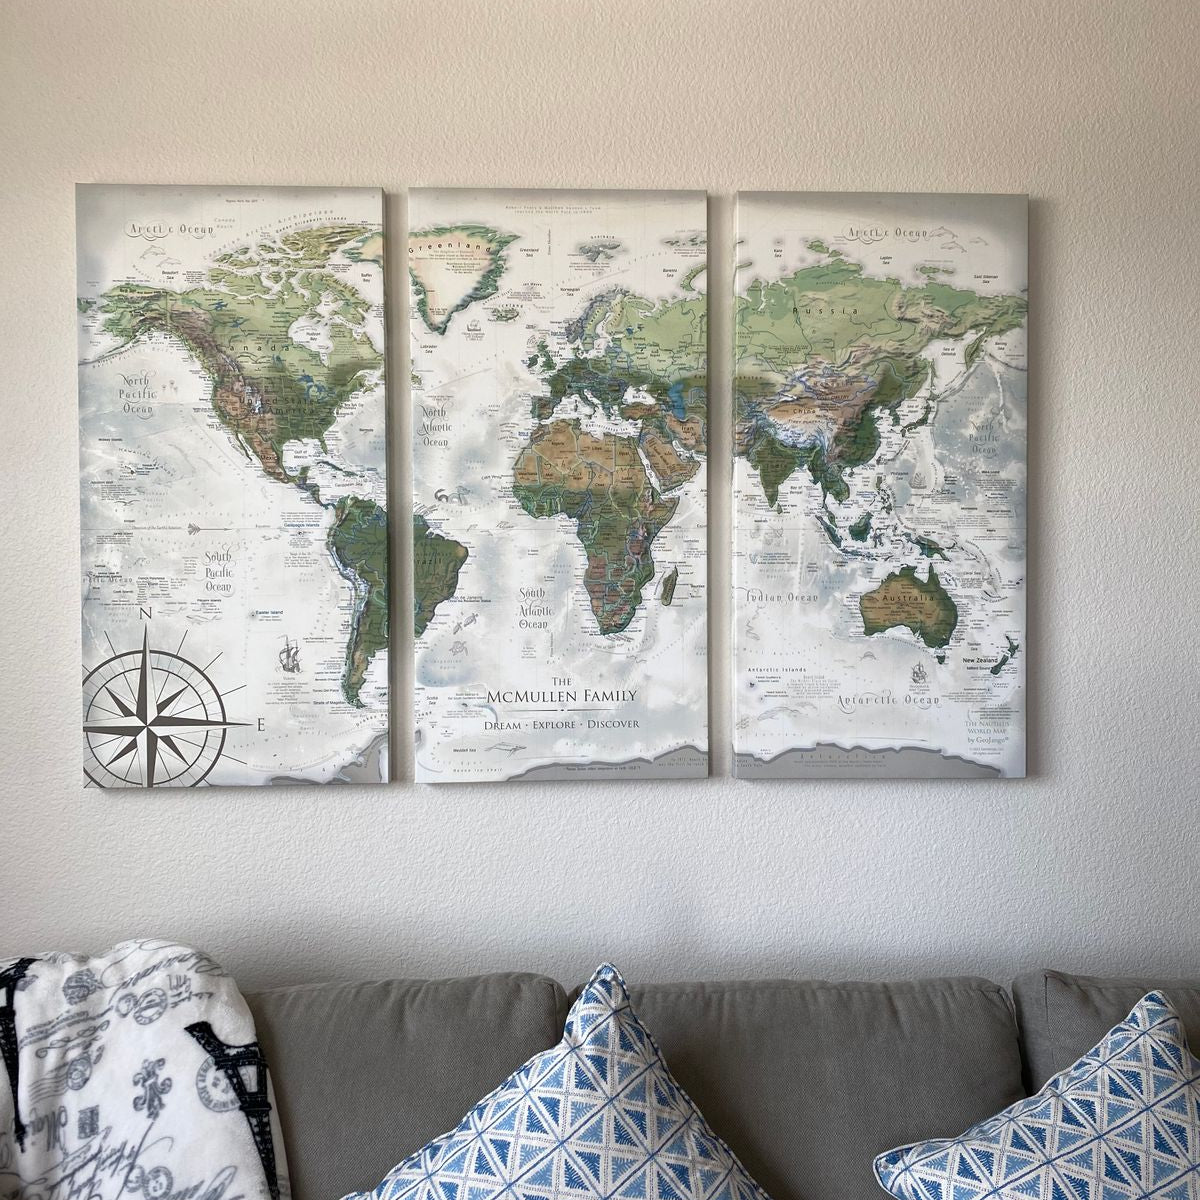 Three panel world push pin travel map hanging above a couch